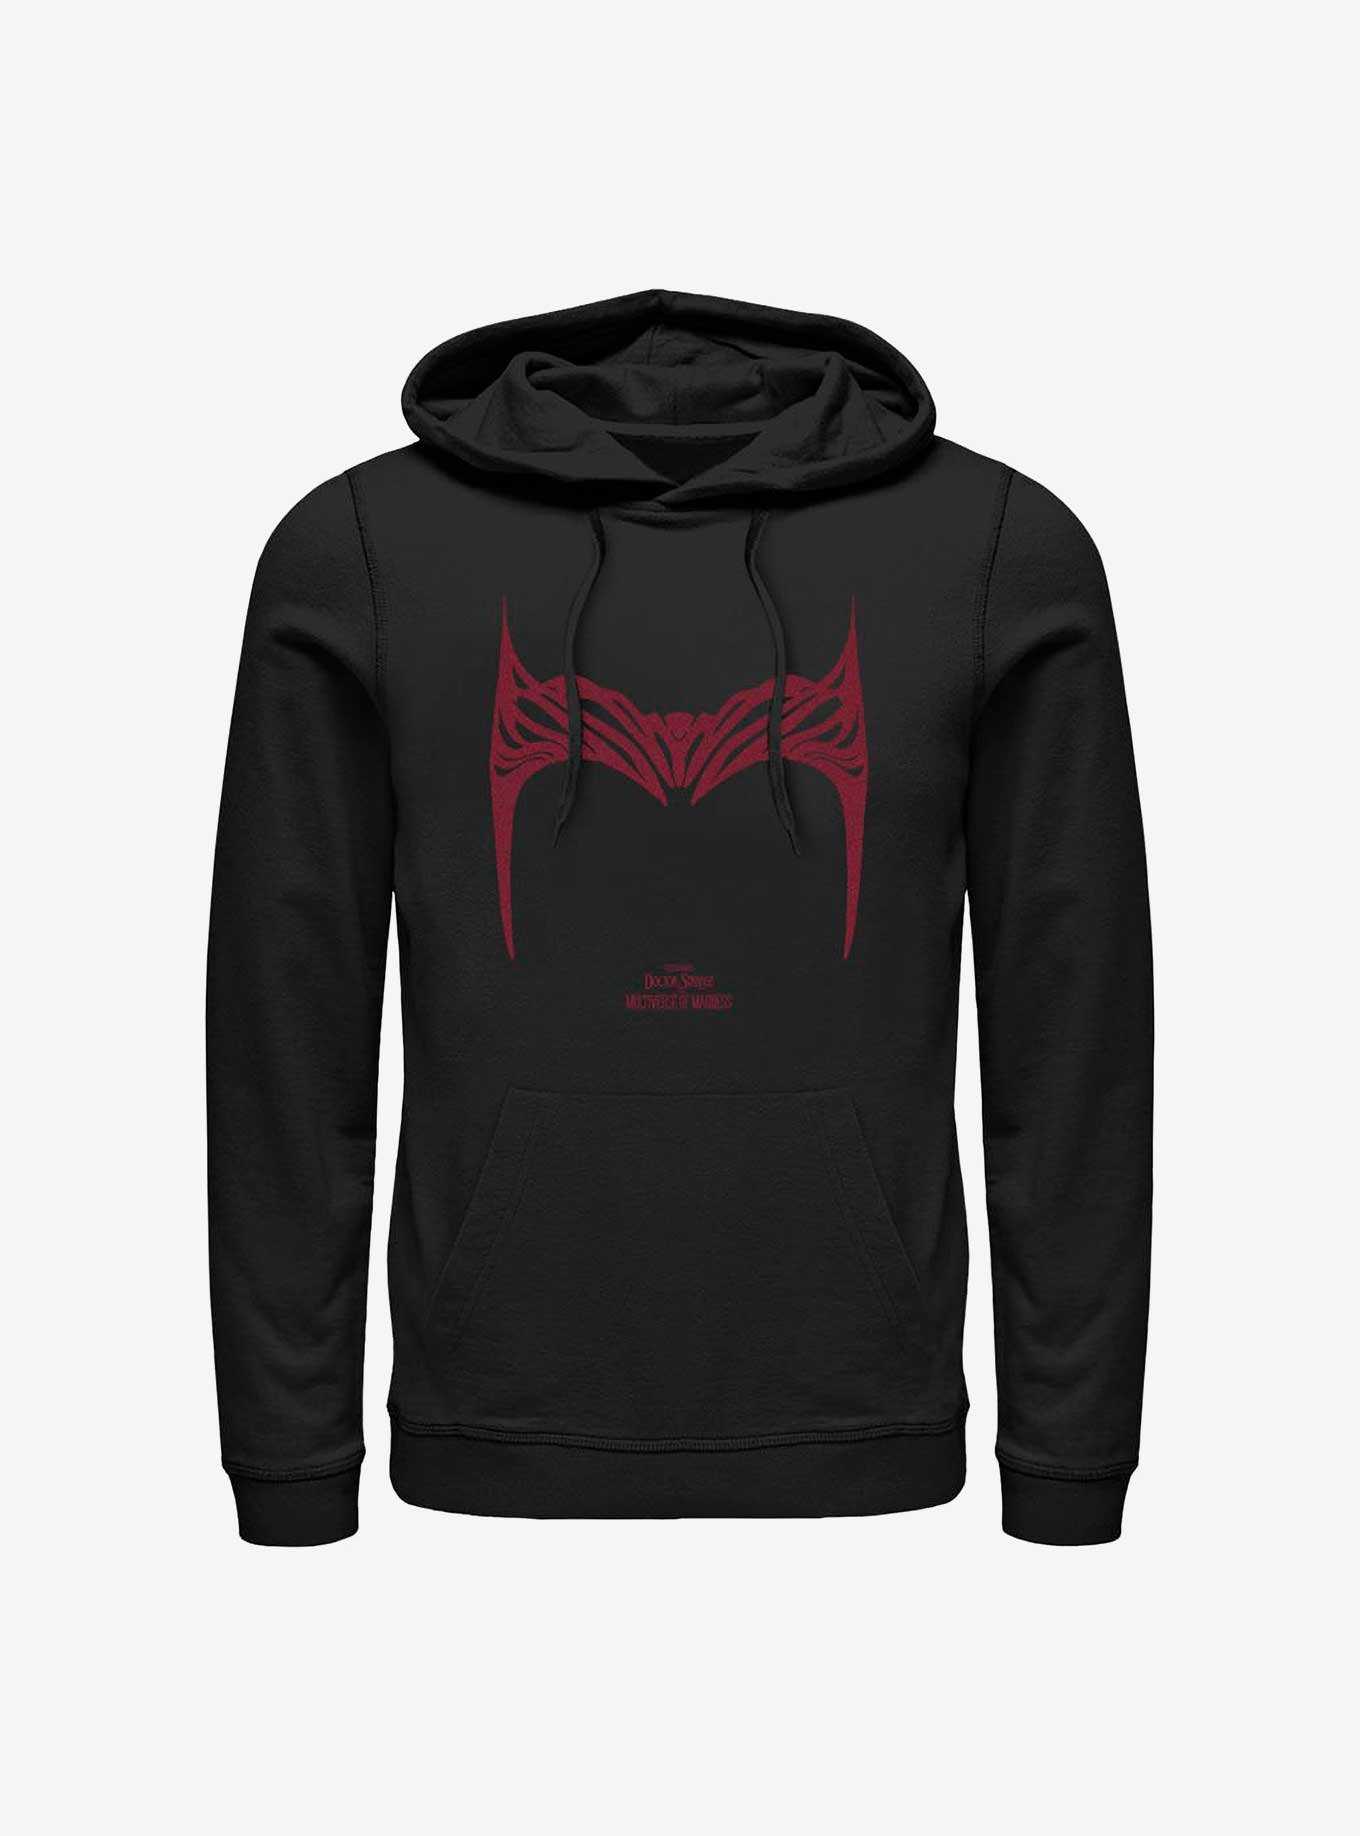 Marvel Doctor Strange In The Multiverse Of Madness Scarlet Witch Helm Hoodie, , hi-res